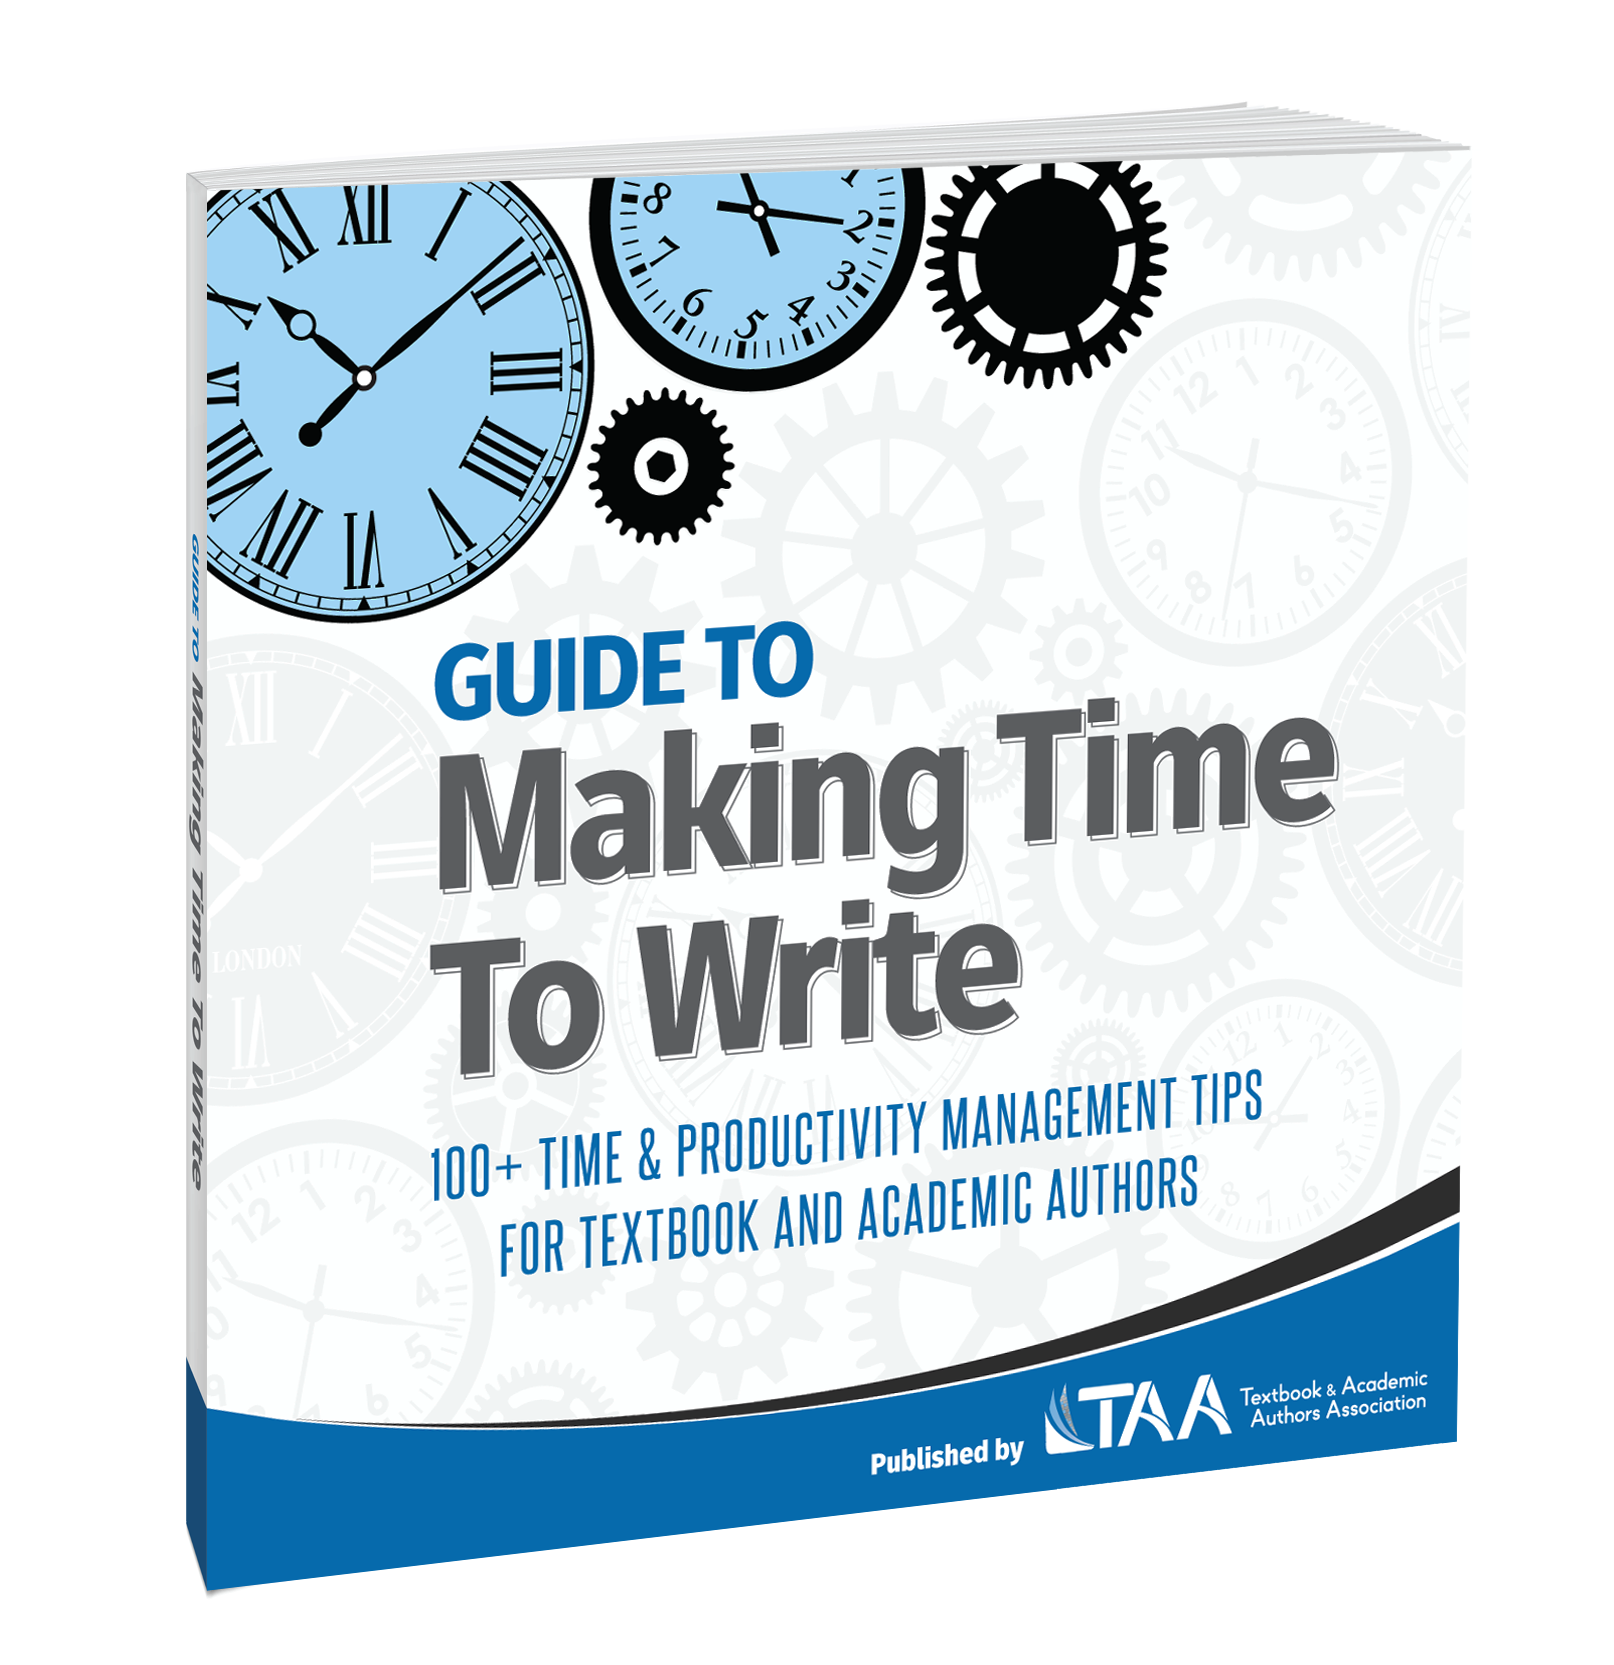 Guide to Making Time to Write